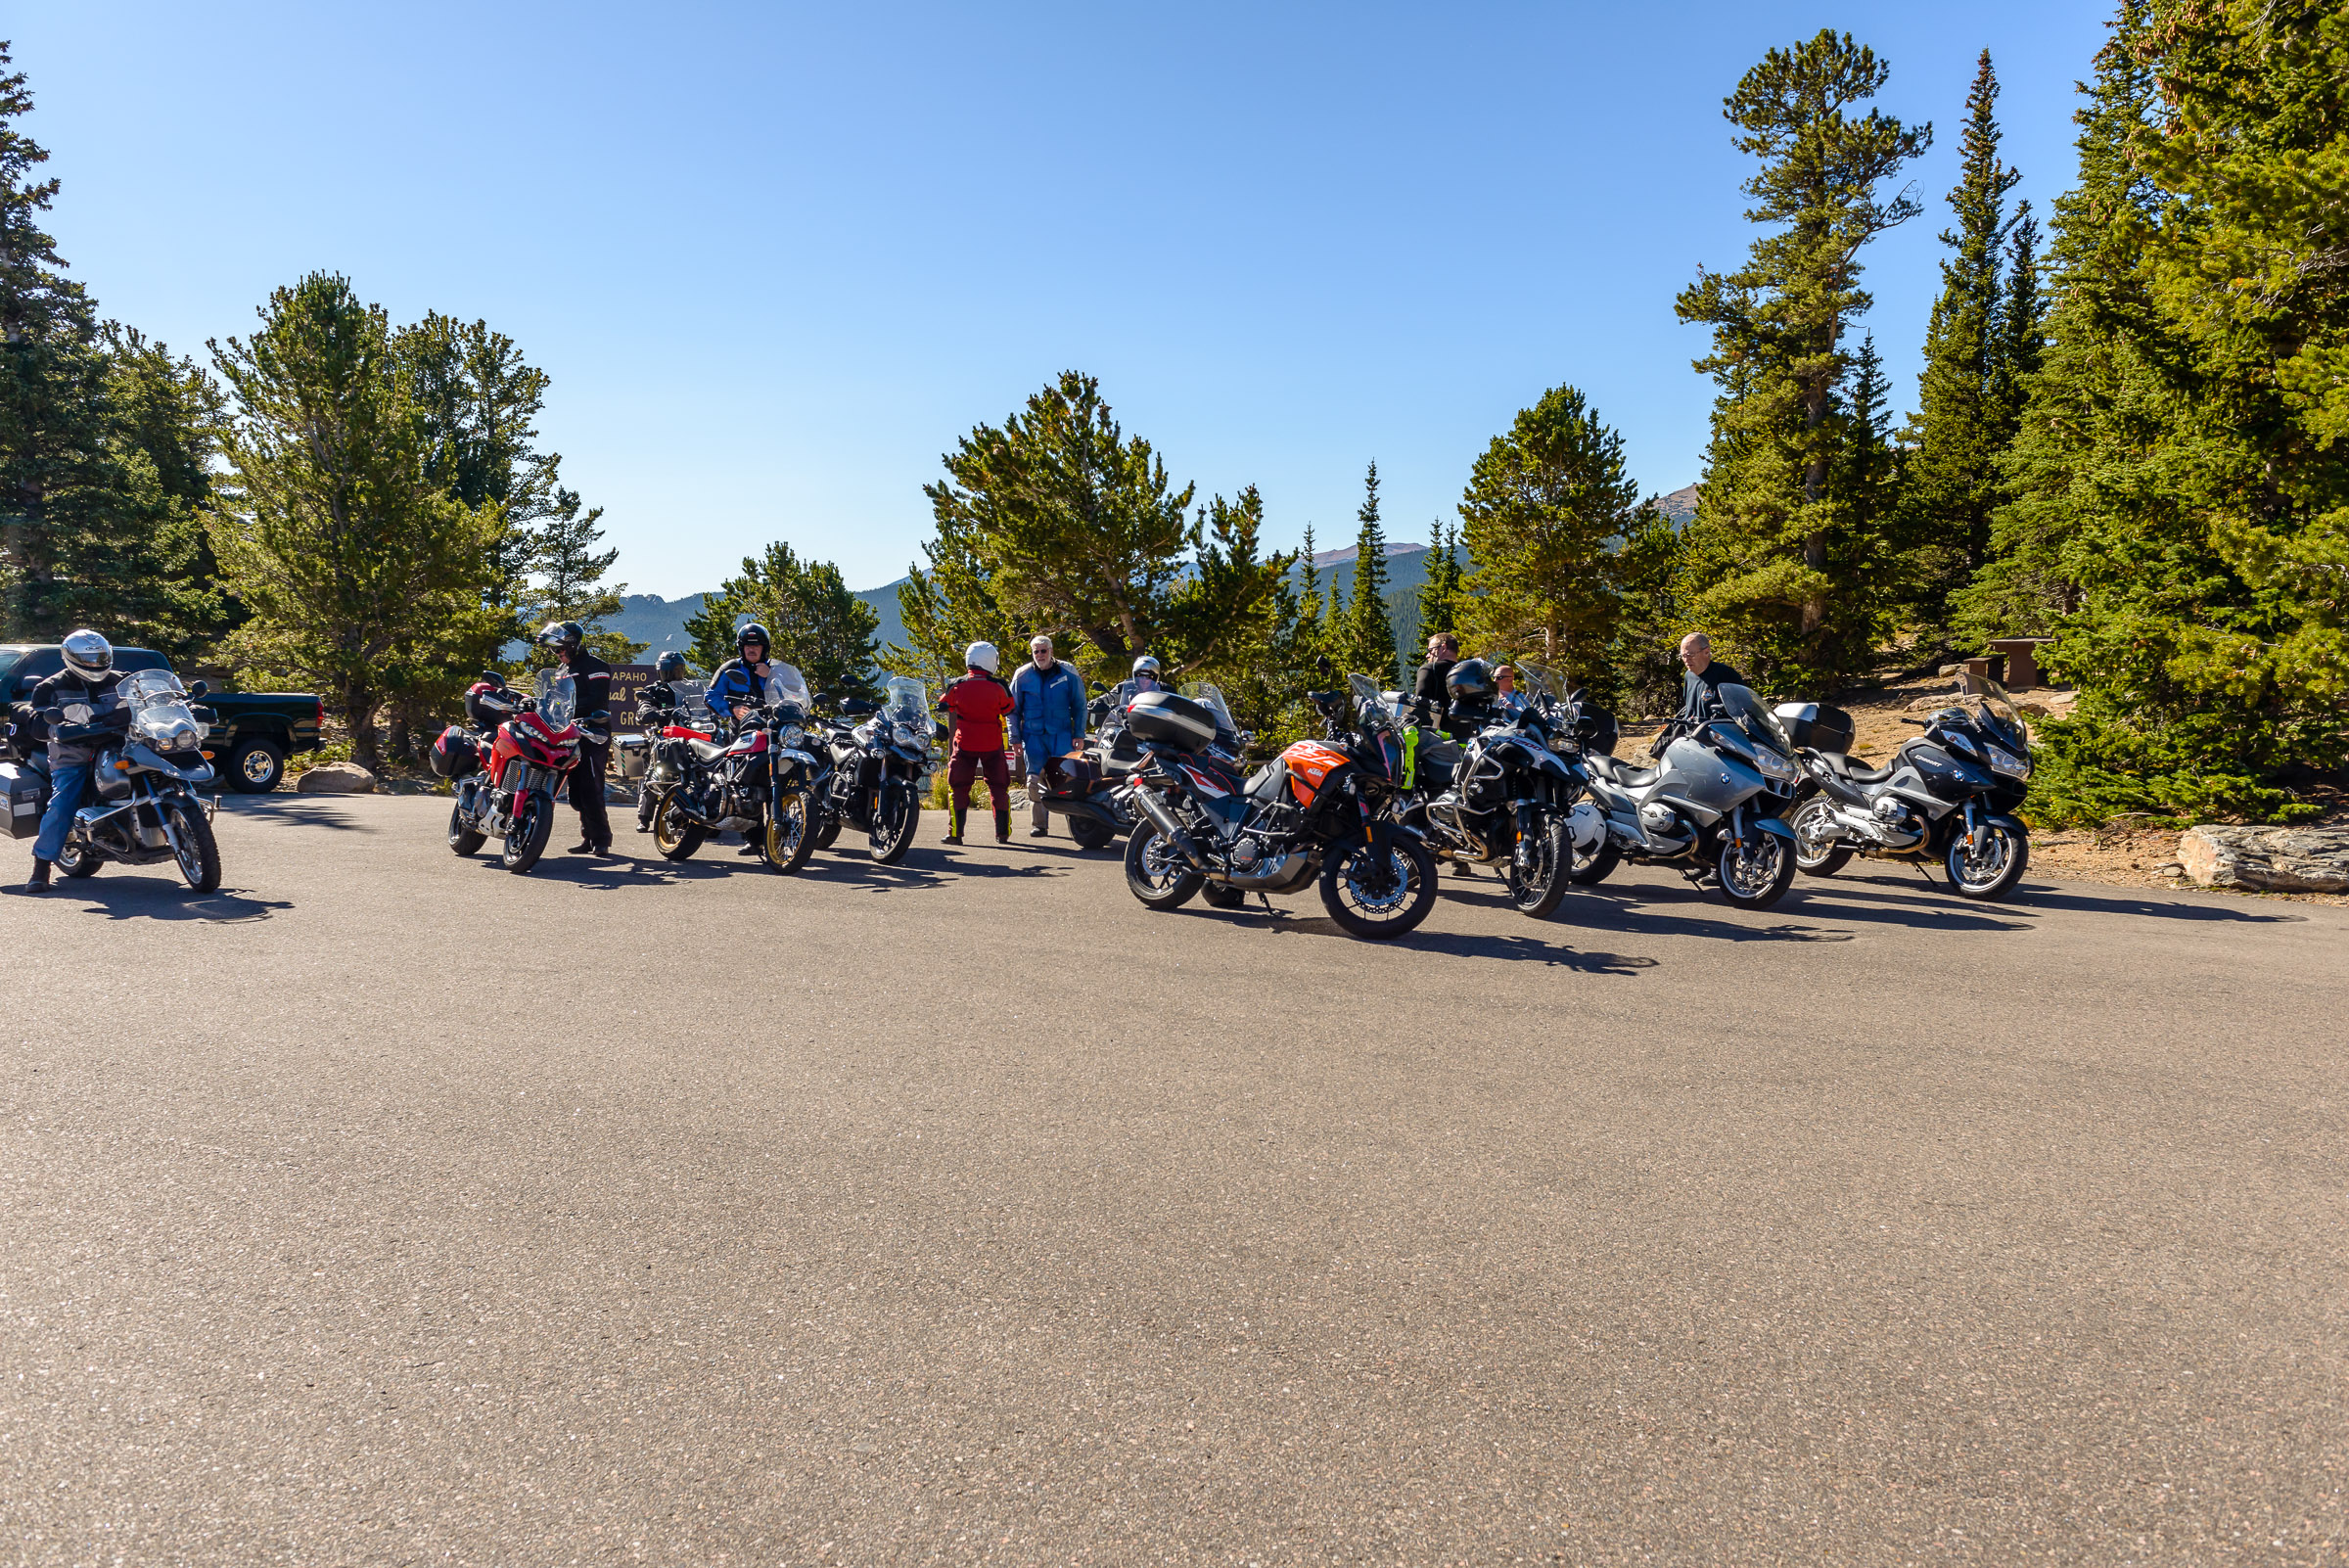 Squaw Pass Road. The  first stop on the BMW Mcy Club Vail loop day ride to  see the leaves. We had 13 bikes.